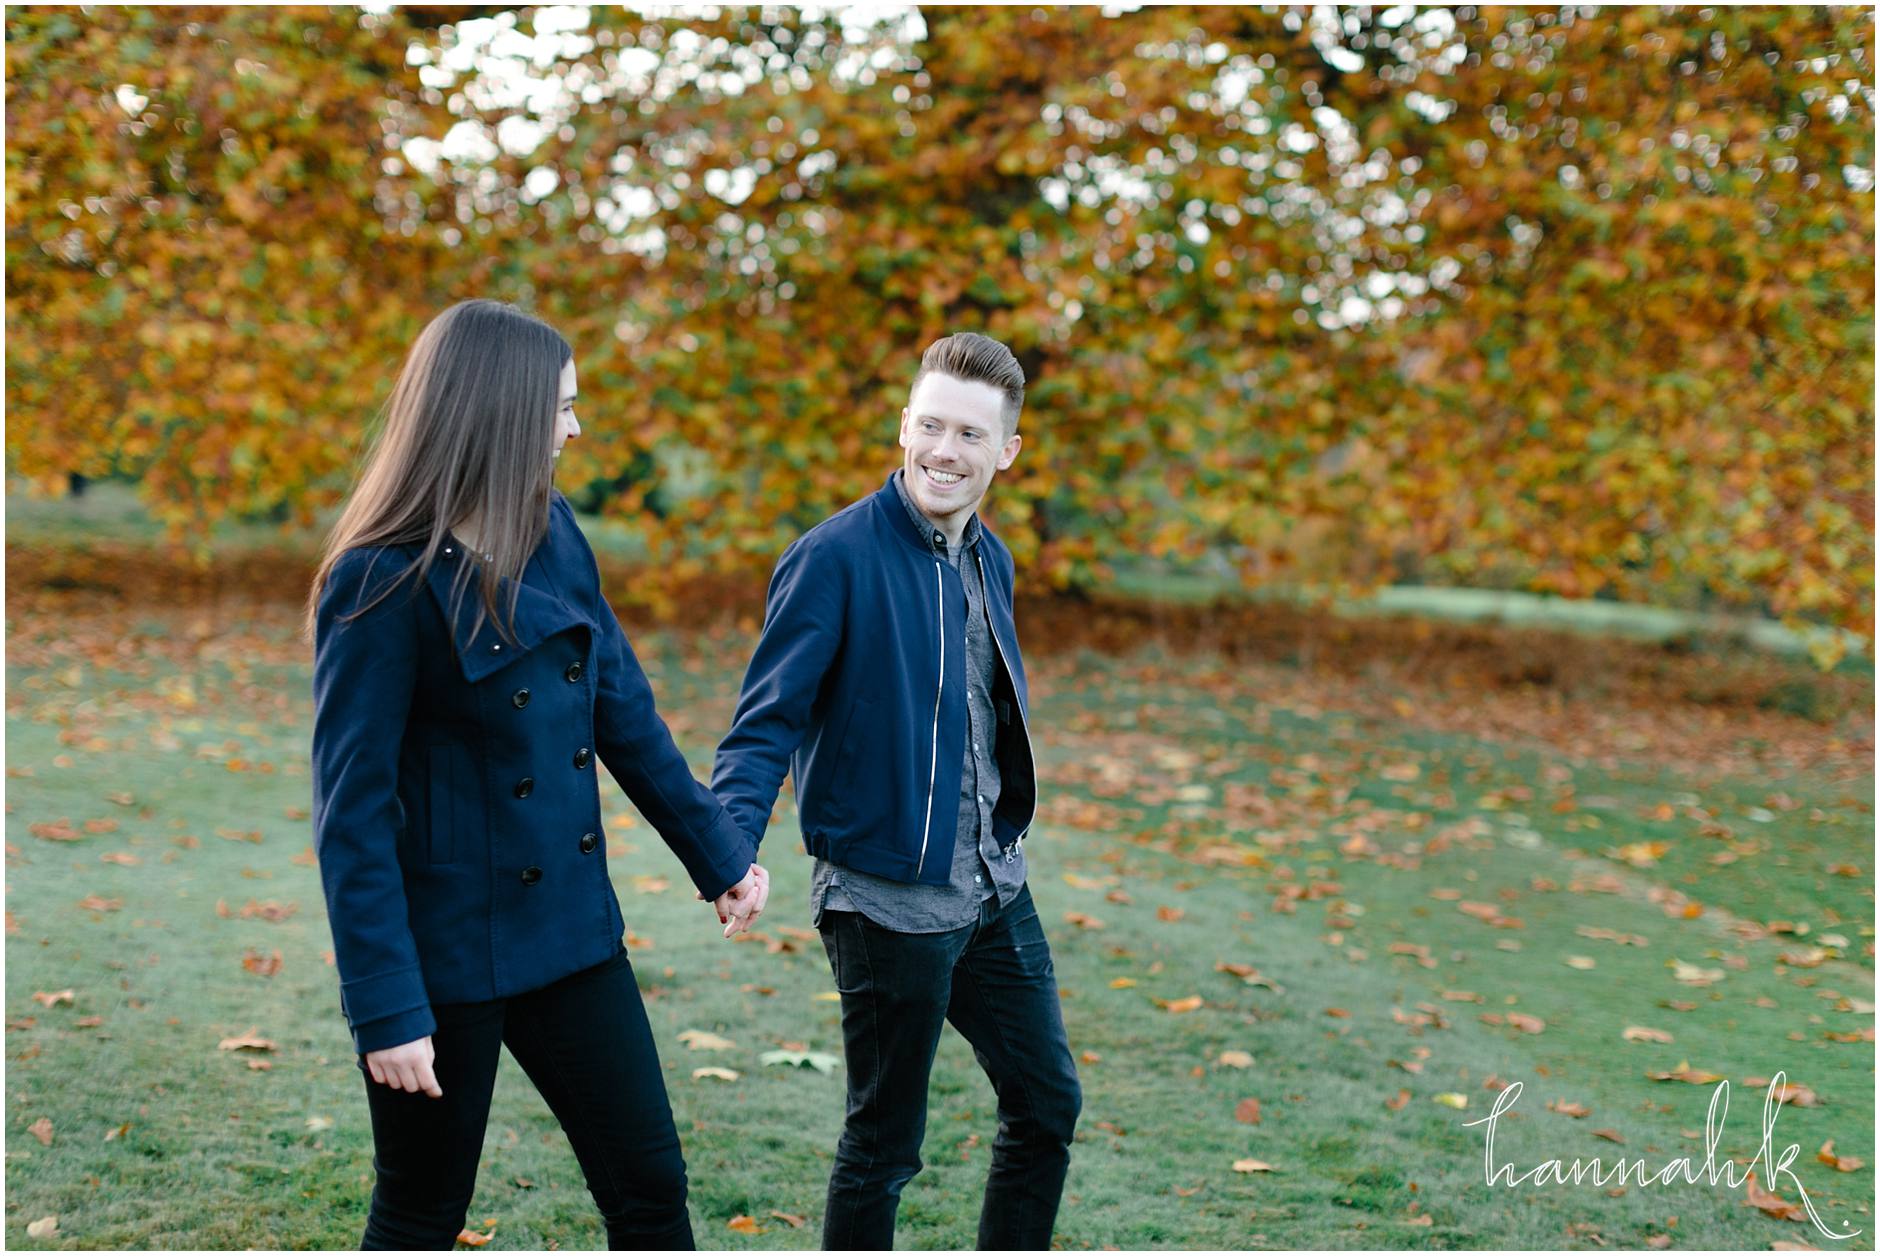 hannah-k-photography-coventry-warwickshire-west-midlands-engagement-photographer-37